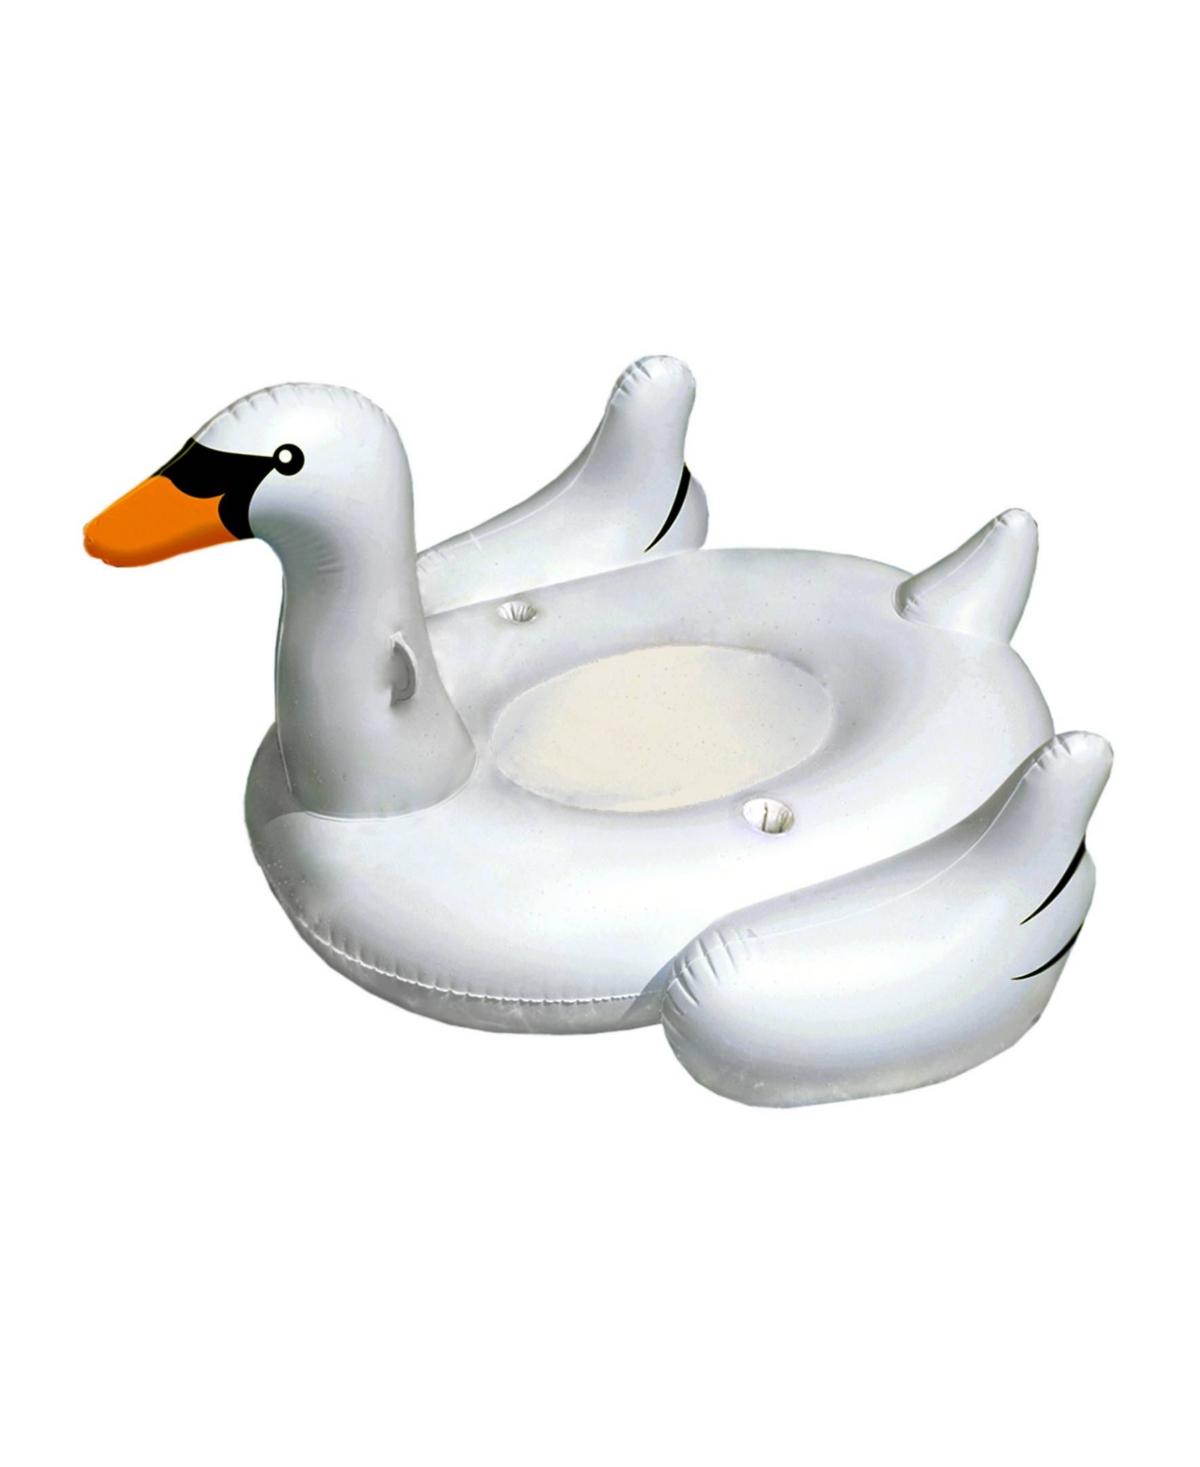 Sports Elegant Giant Swan 73" Inflatable Ride-On Swimming Pool Float - White